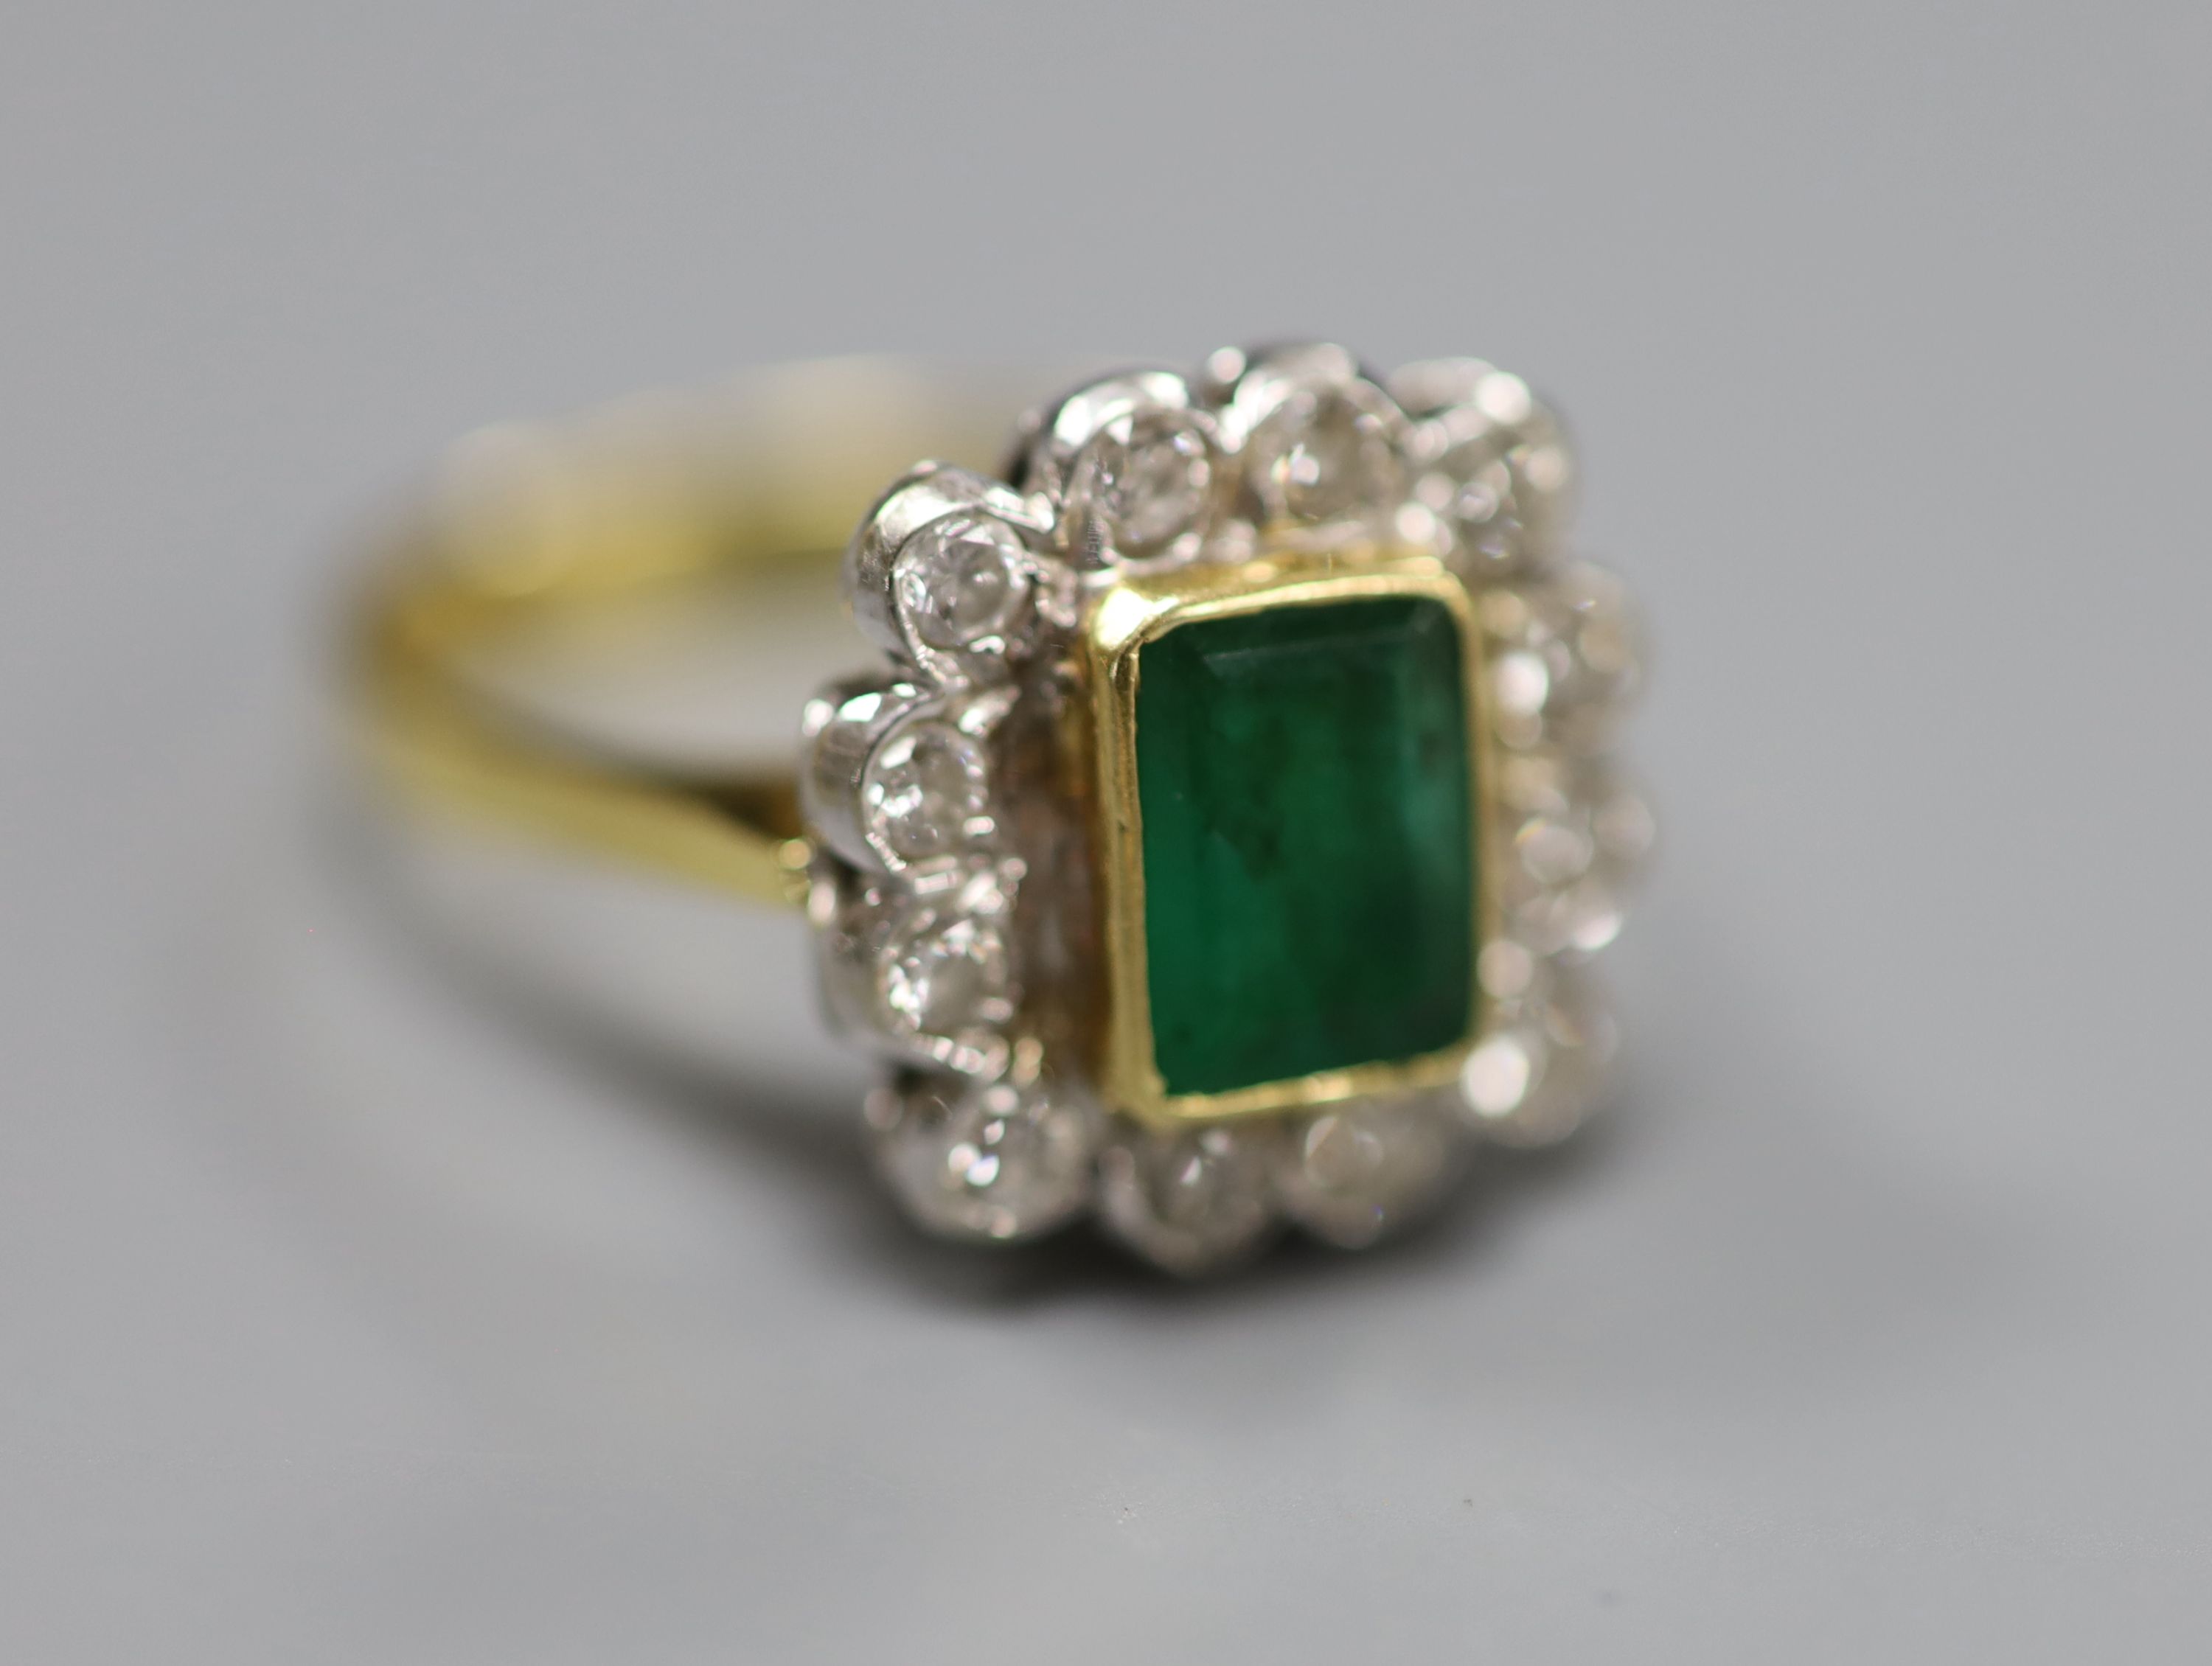 An emerald and diamond cluster ring, white and yellow metal setting (tests as 18ct), size Q, gross 6g.